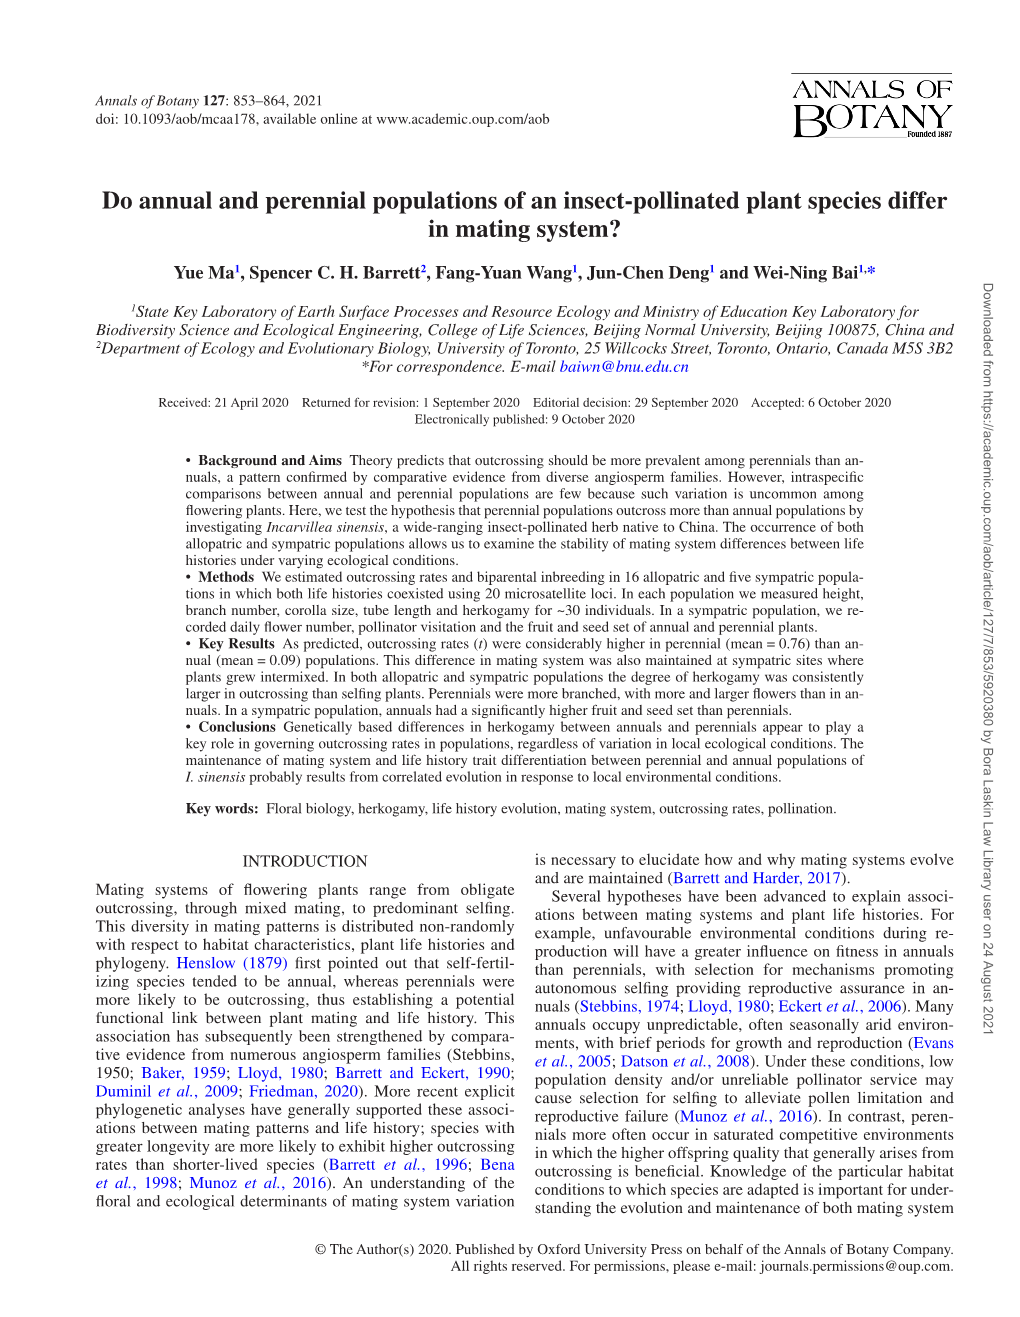 Do Annual and Perennial Populations of an Insect-Pollinated Plant Species Differ in Mating System?